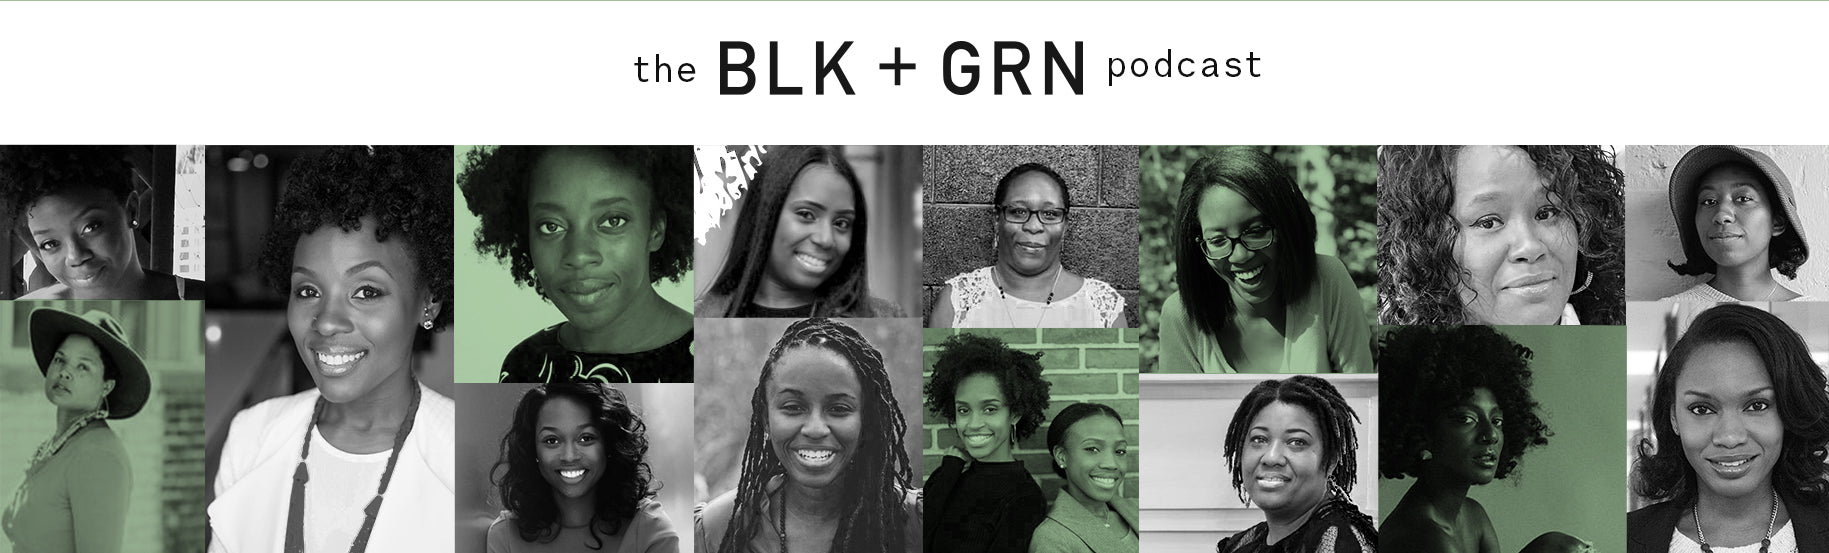 Welcome to the BLK + GRN Podcast- BLK+GRN